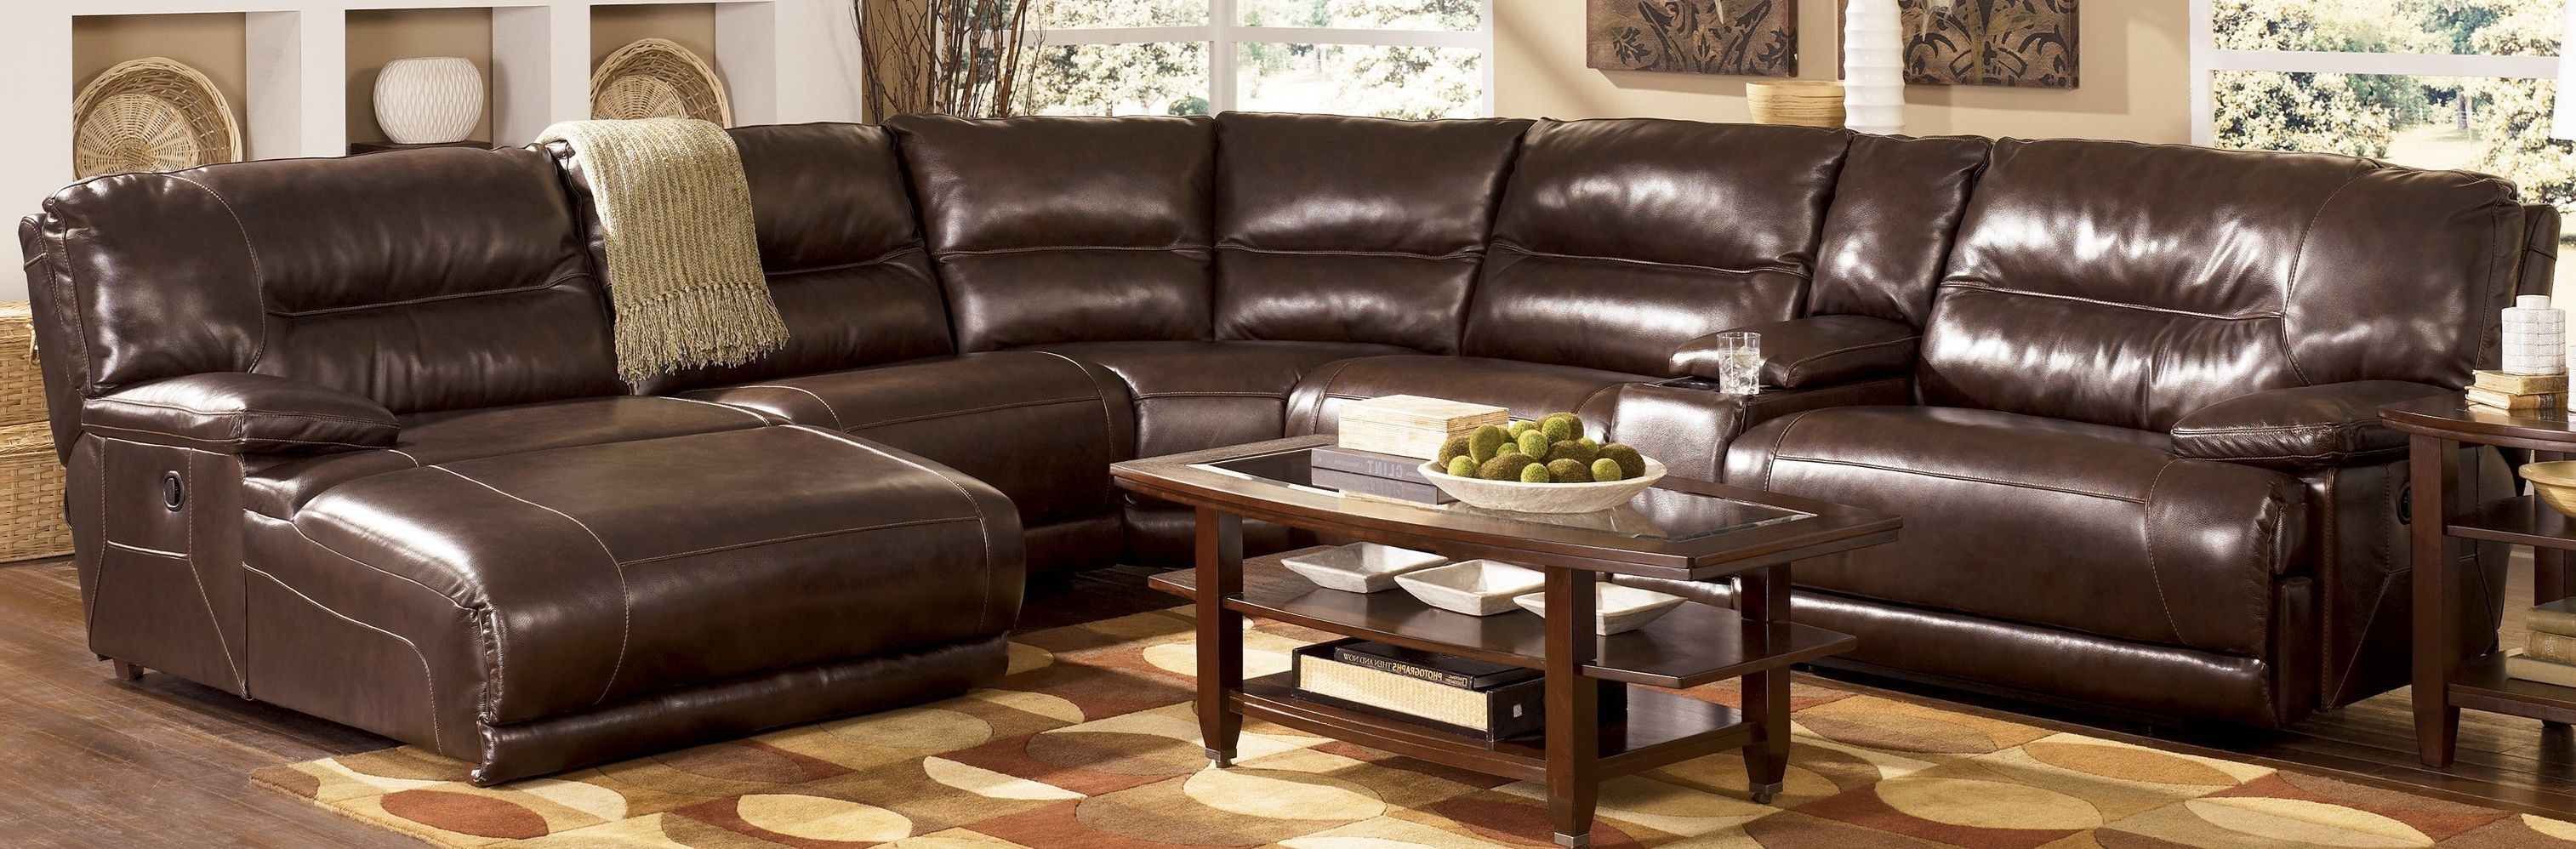 Sofa : Sectional With Recliner And Chaise Lounge Couch Covers For In Most Current Leather Lounge Sofas (Photo 15 of 15)